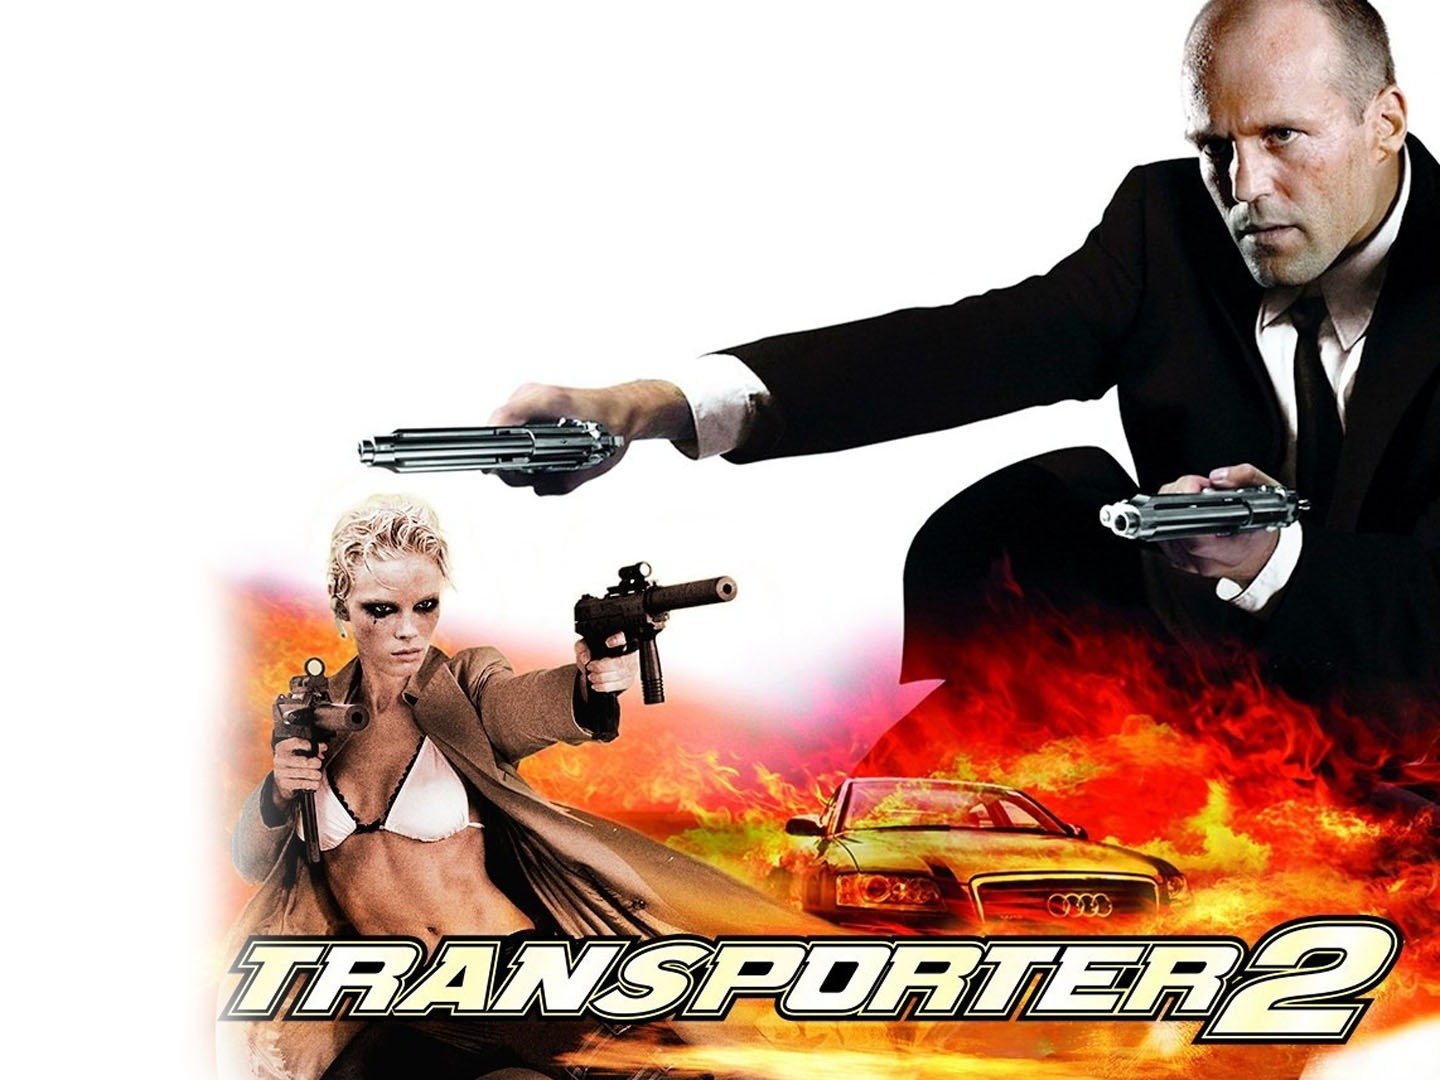 48-facts-about-the-movie-transporter-2